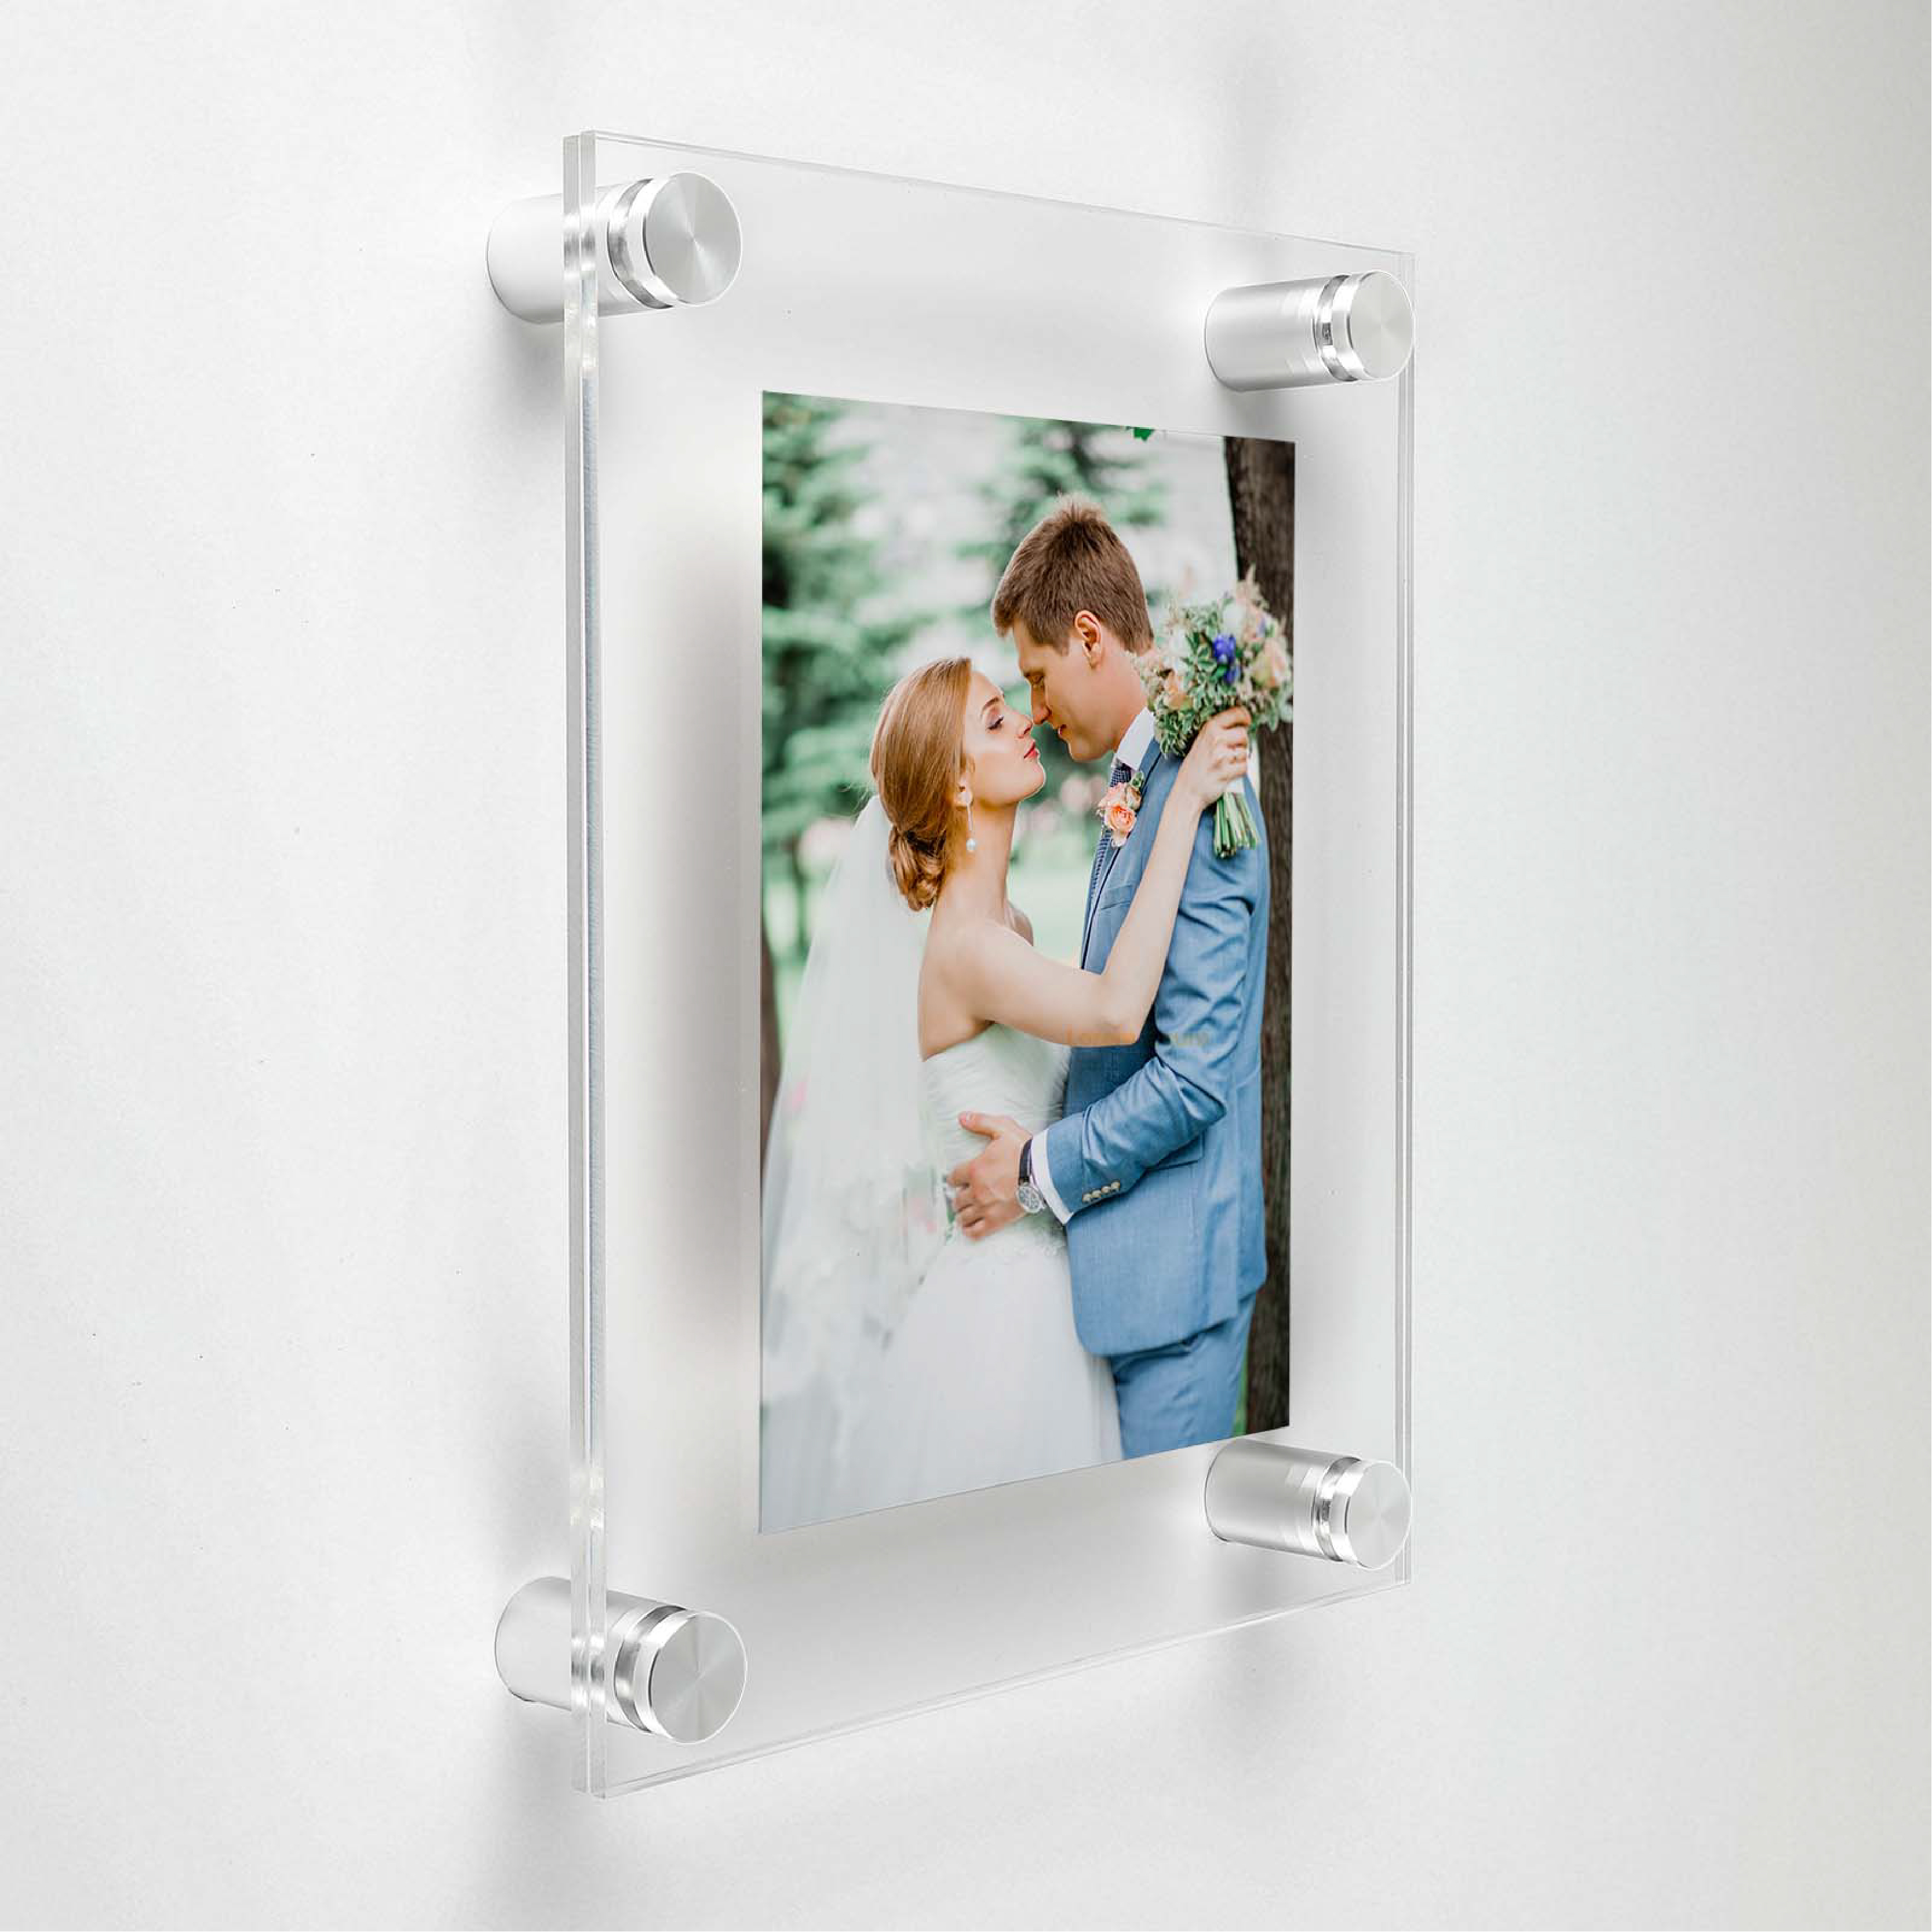 (2) 19-3/4'' x 26'' Clear Acrylics , Pre-Drilled With Polished Edges (Thick 3/16'' each), Wall Frame with (4) 3/4'' x 1'' Silver Anodized Aluminum Standoffs includes Screws and Anchors